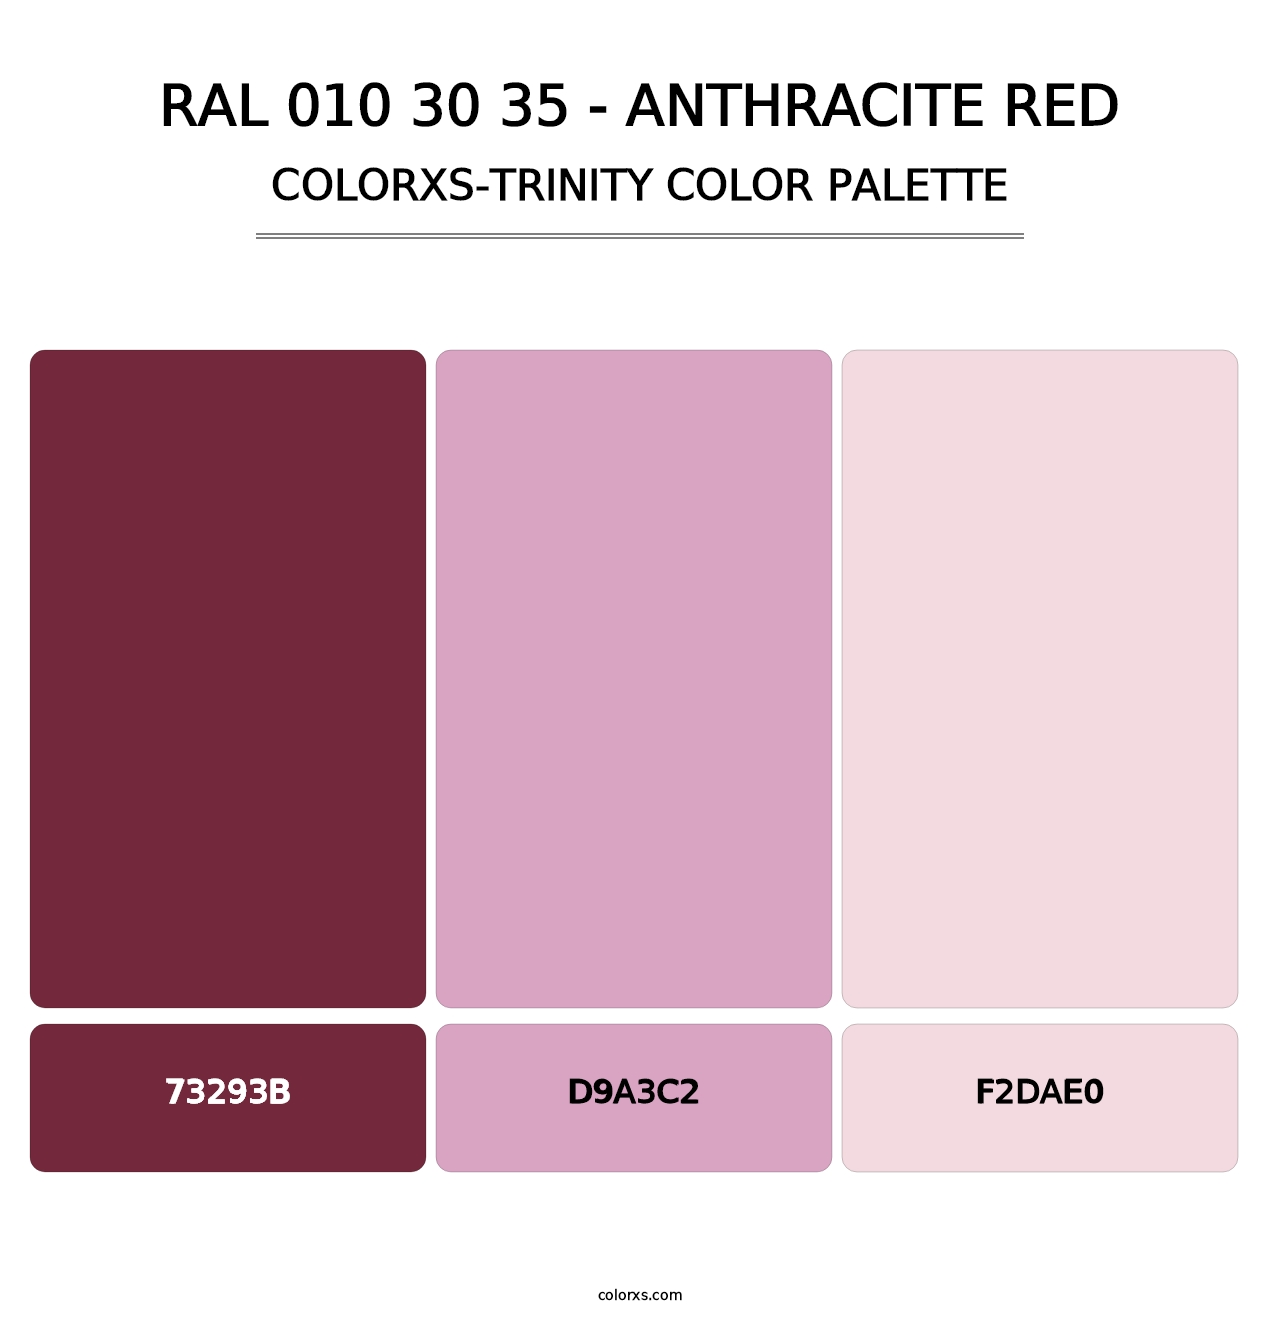 RAL 010 30 35 - Anthracite Red - Colorxs Trinity Palette